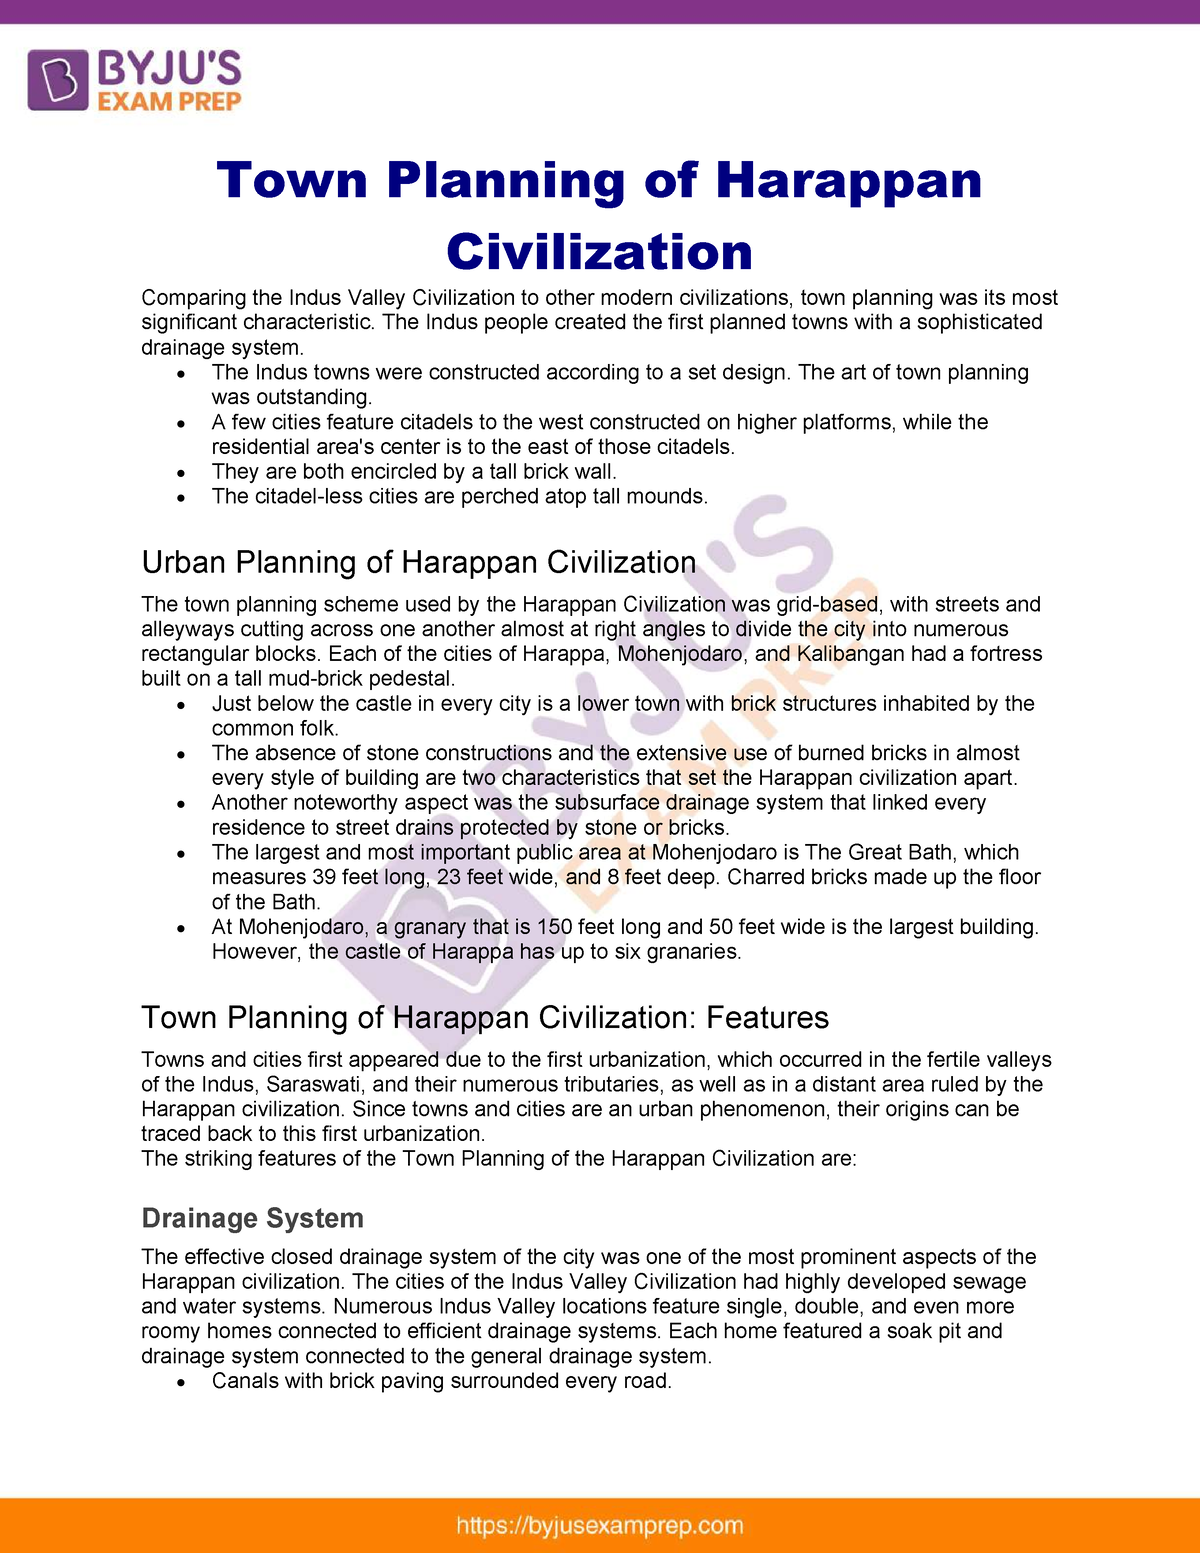 Town planning of harappan civilization upsc notes 57 Town Planning of